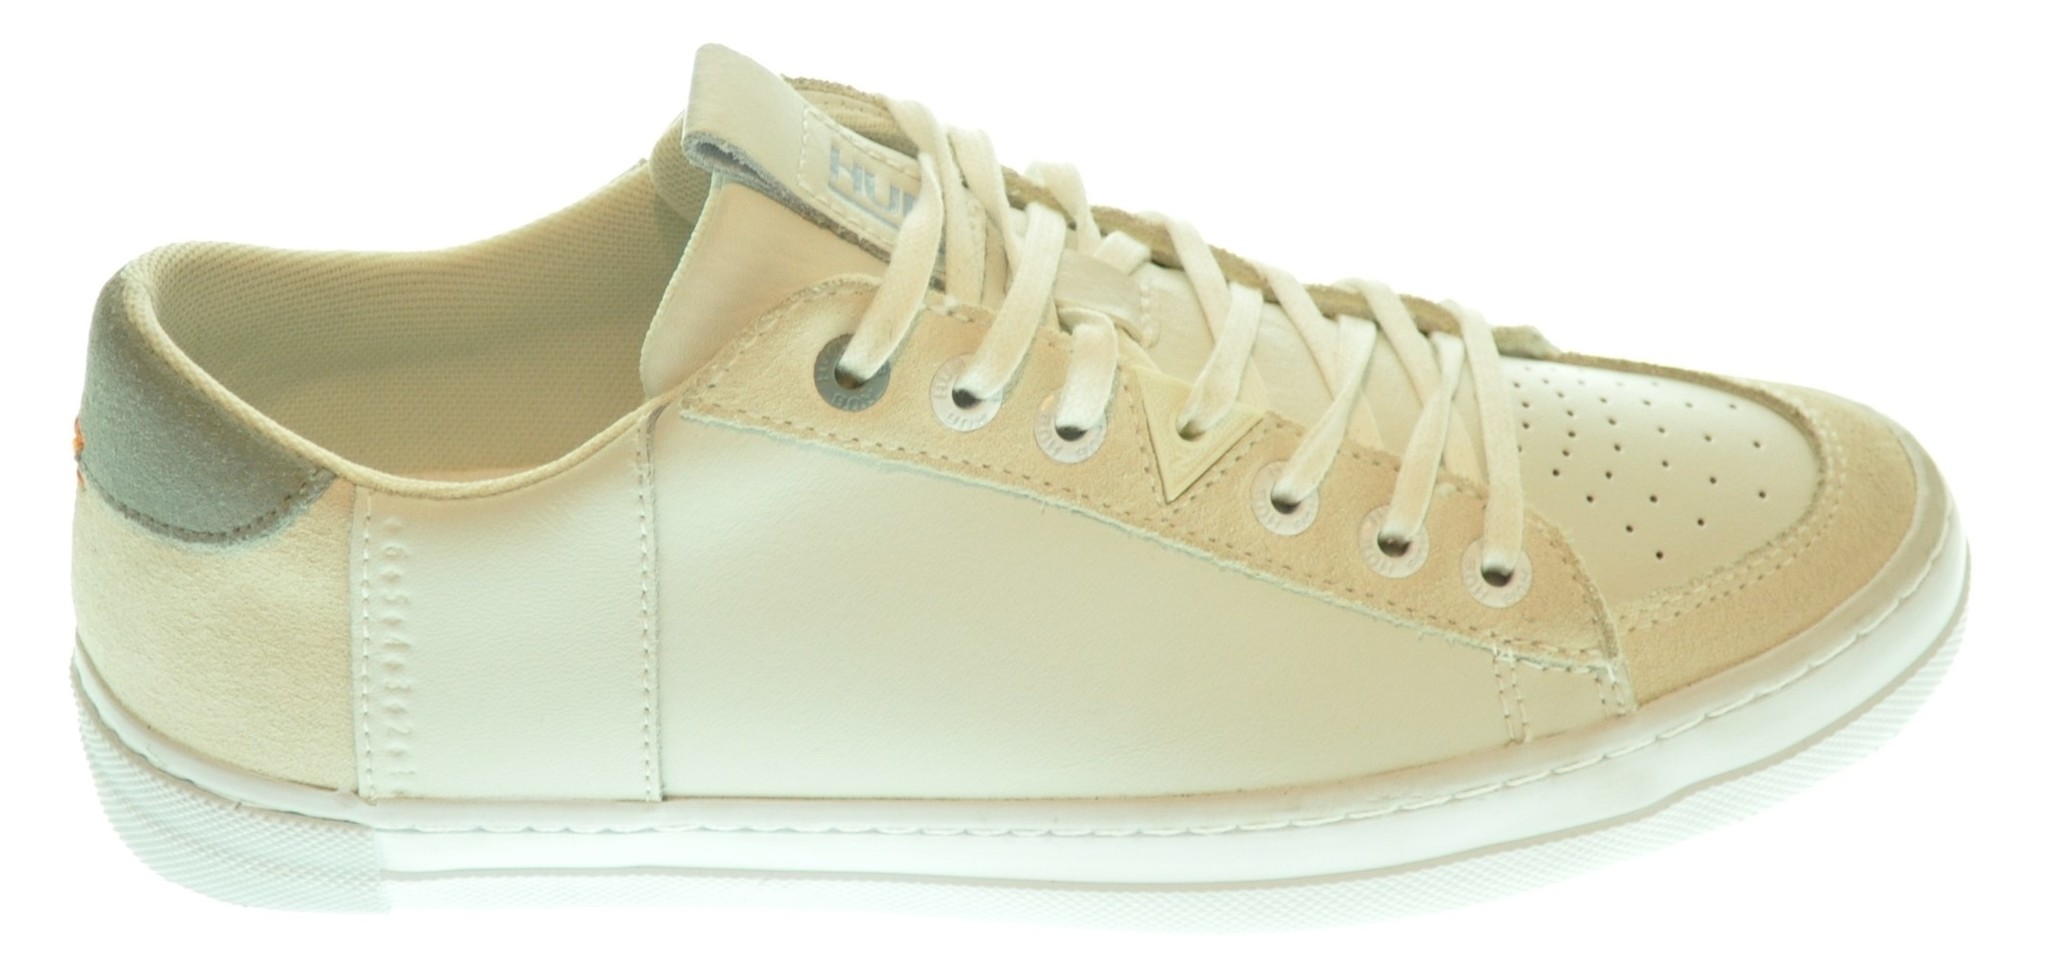 kennisgeving Lelie Of later Hub Sneakers ( 36 t/m 41 ) - Zandbergen Shoes